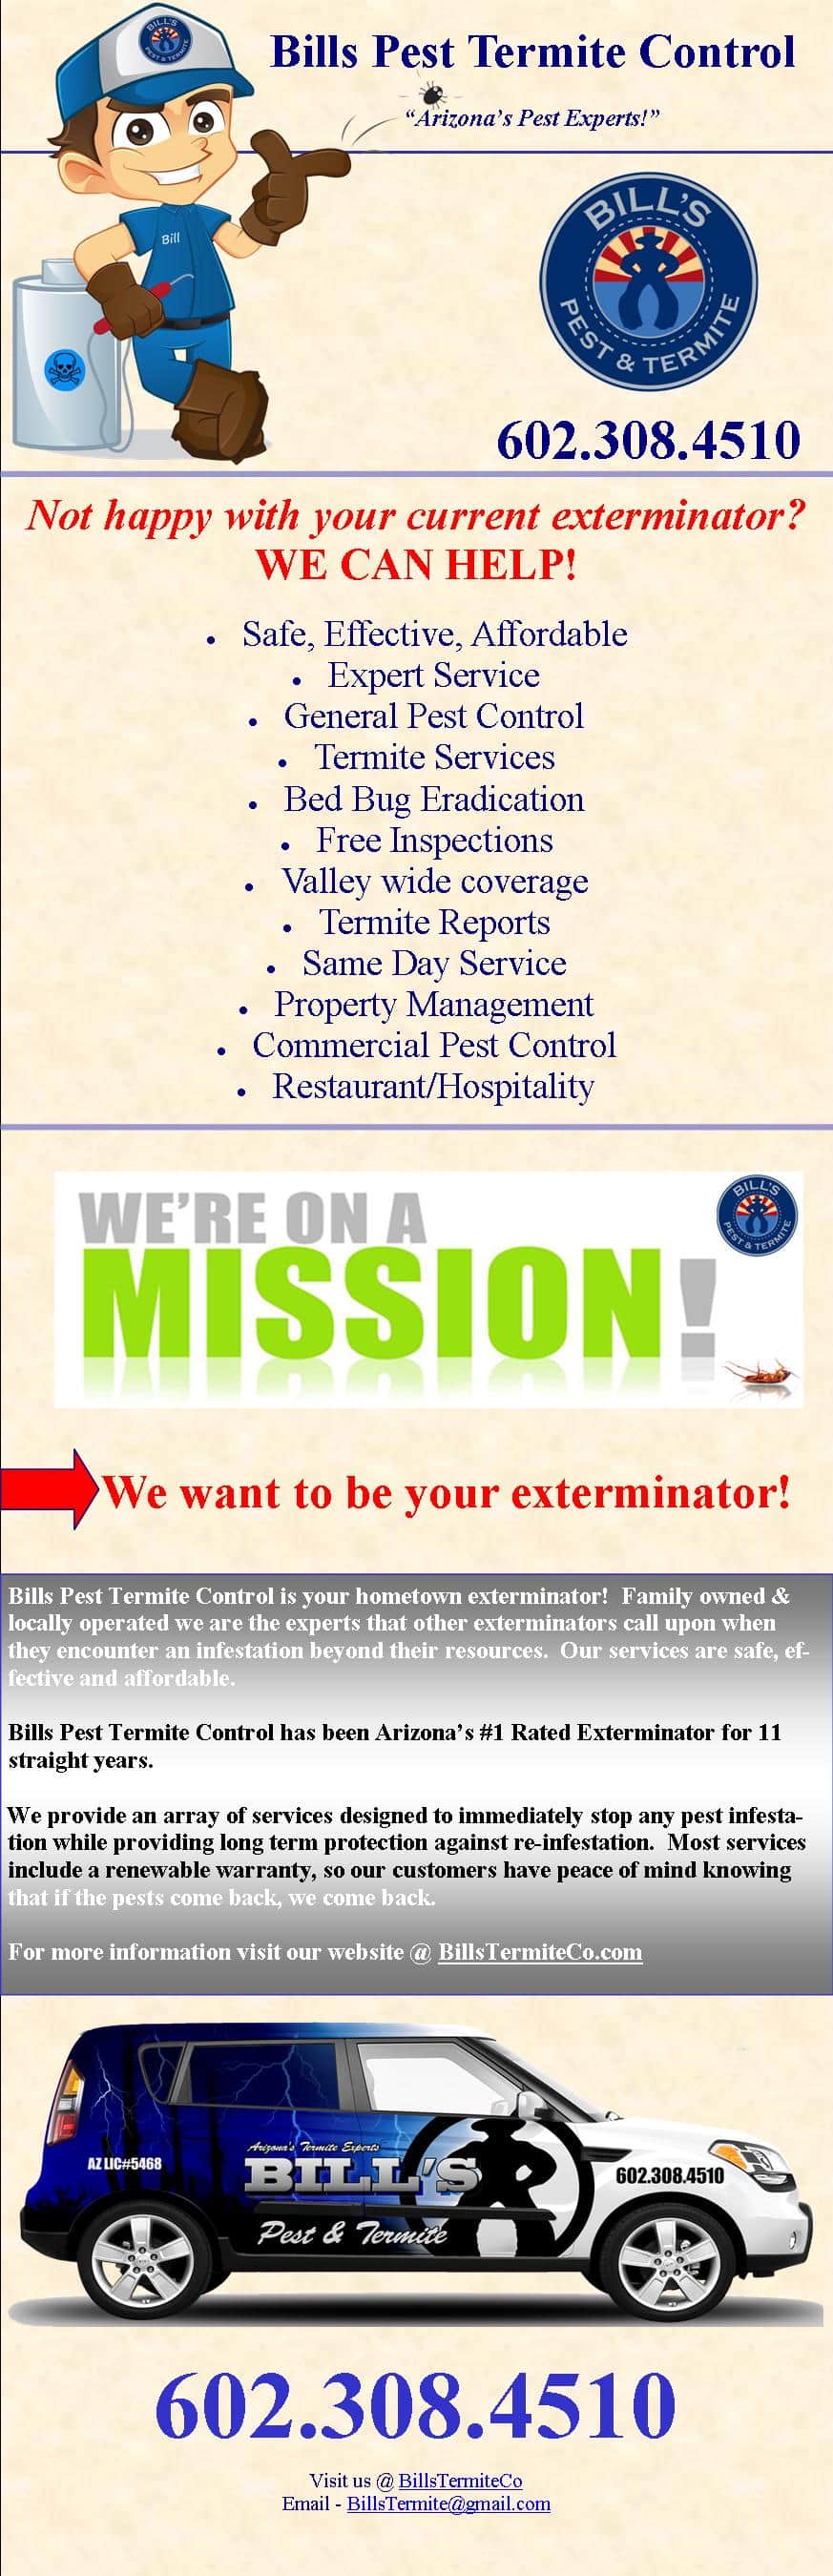 We want to be your exterminator